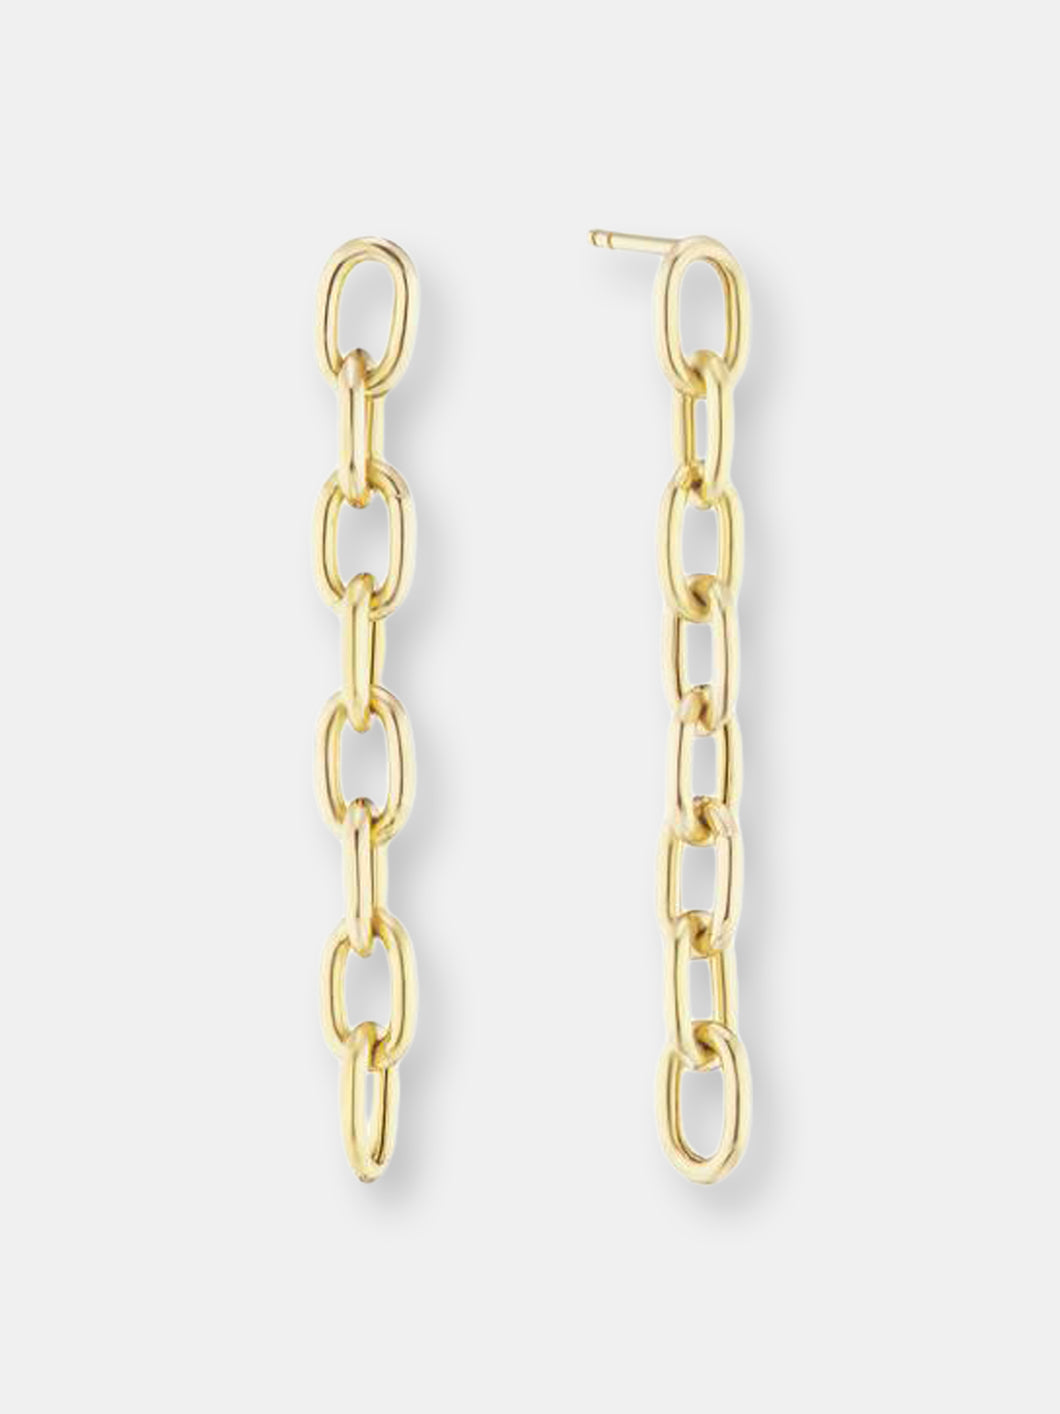 Elongated Thick Chain Link Earrings Long